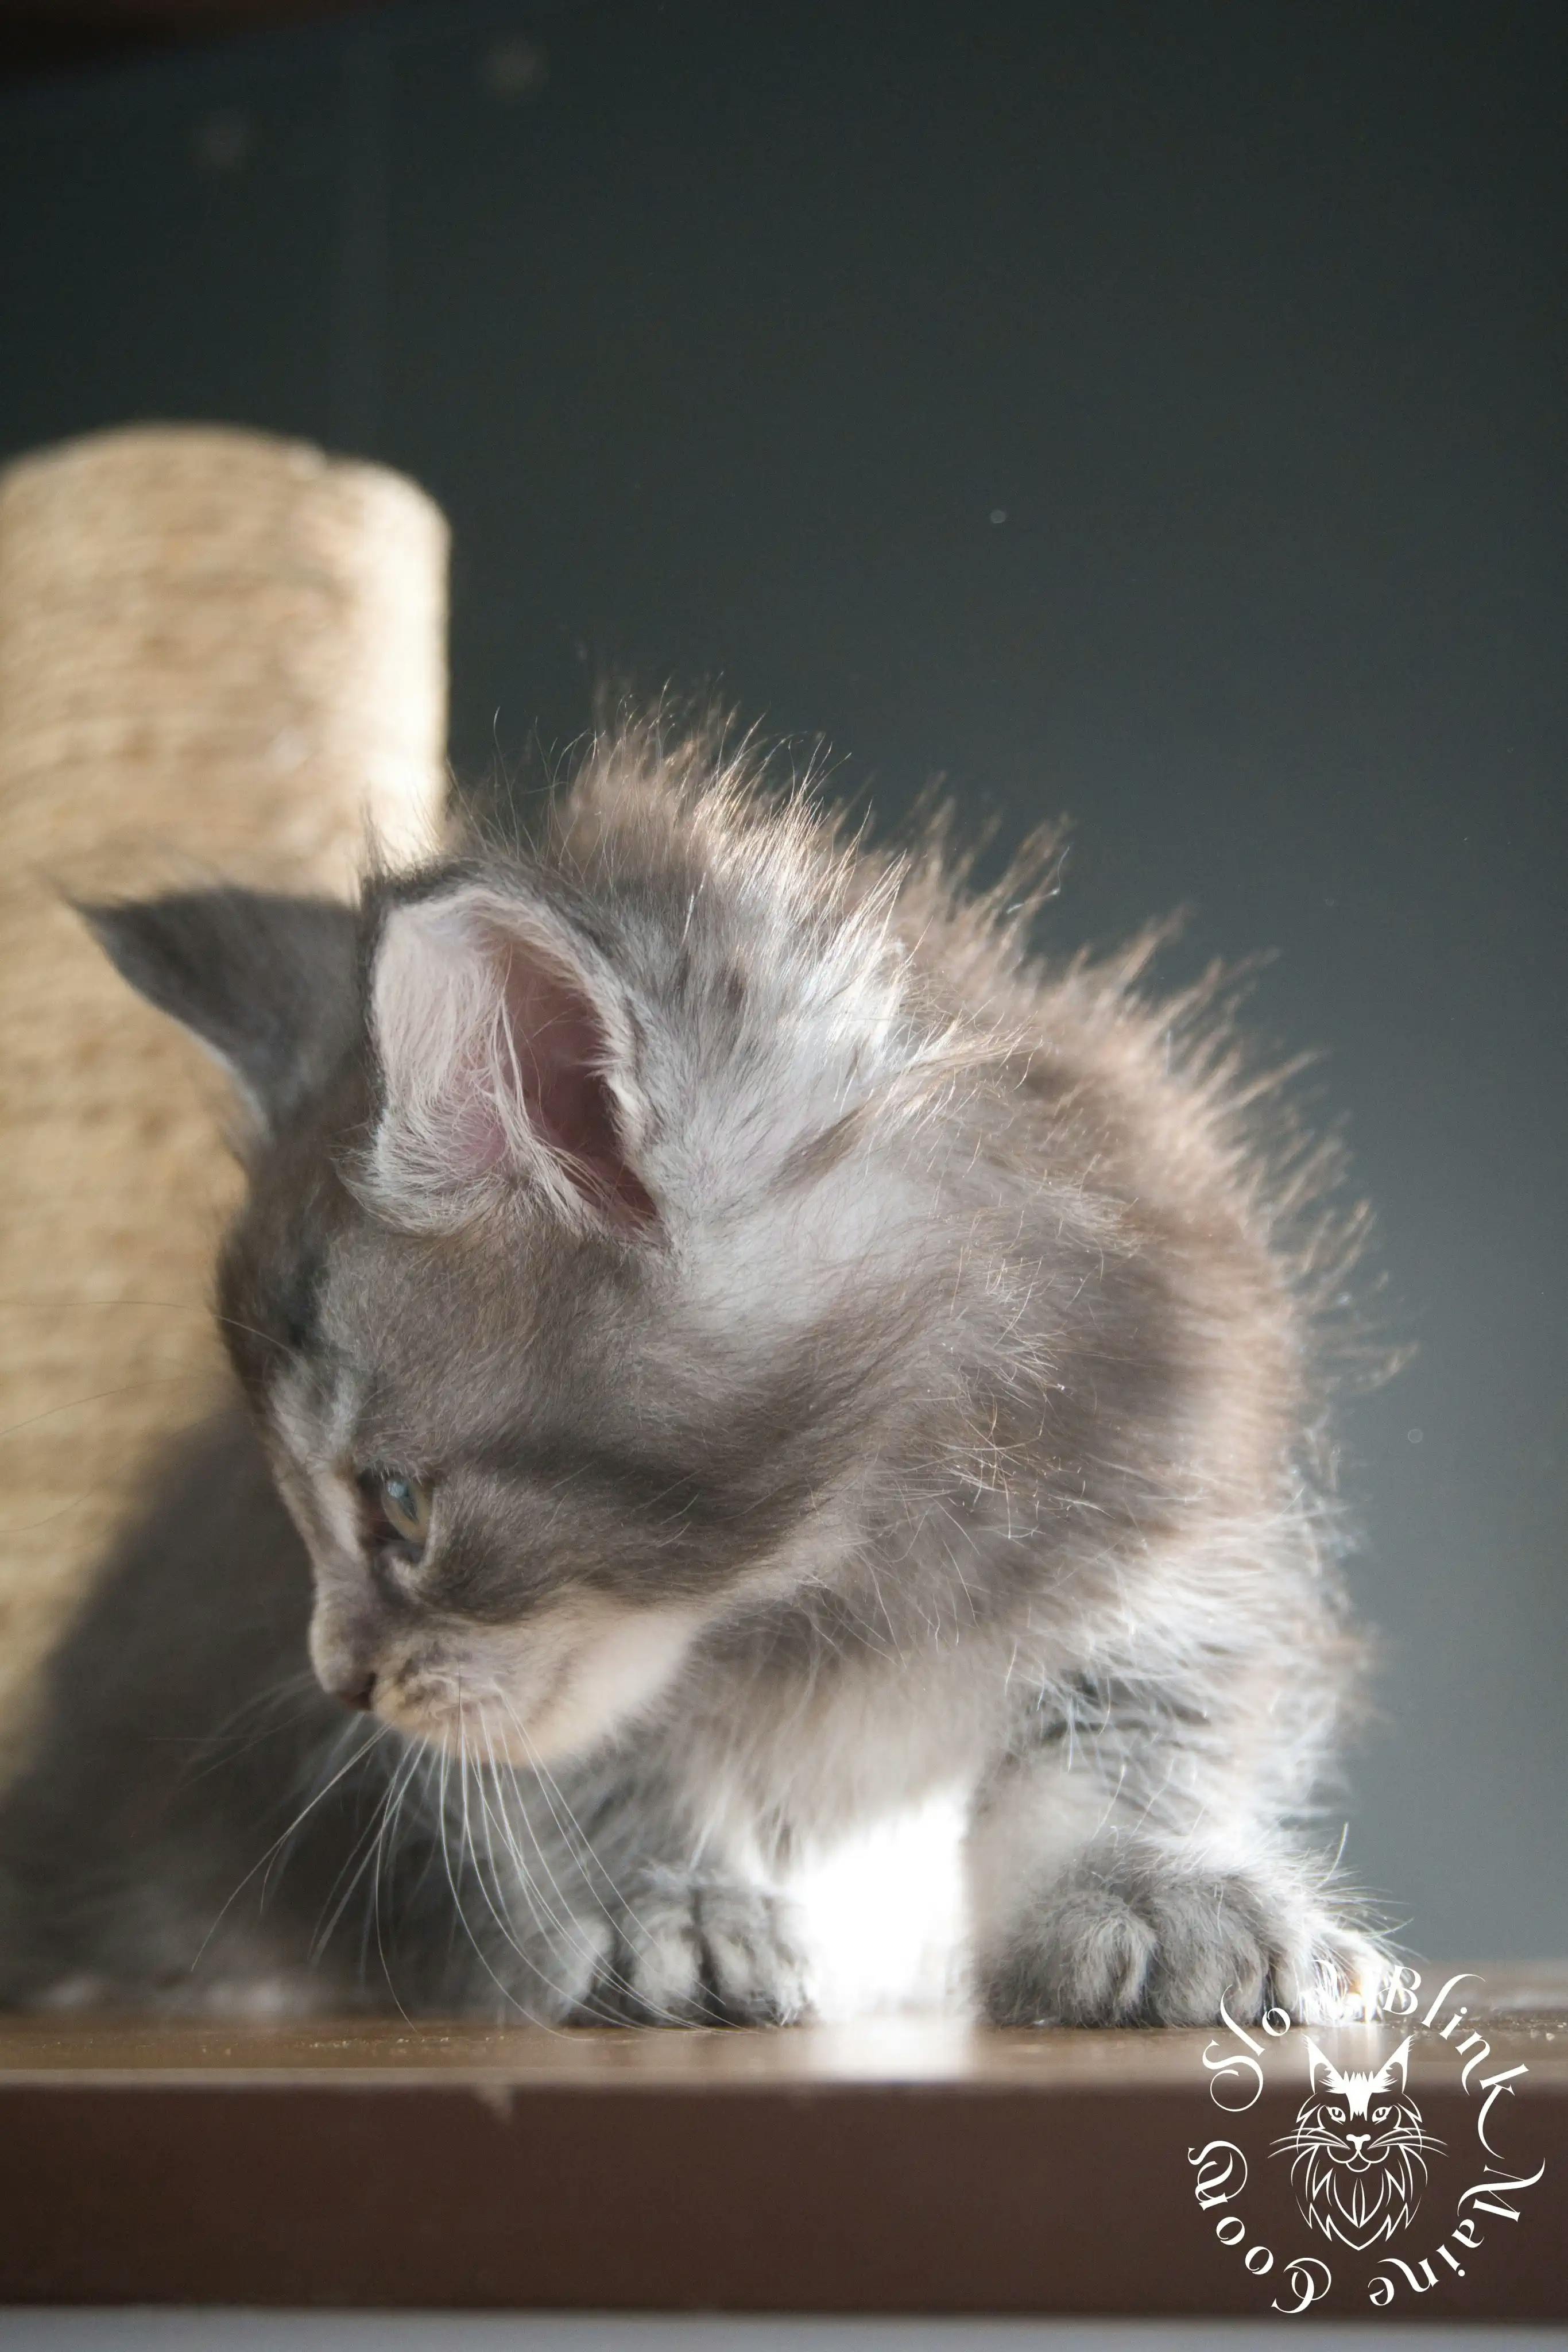 Blue Silver Tabby Maine Coon Kittens > blue silver tabby maine coon kitten | slowblinkmainecoons | 307